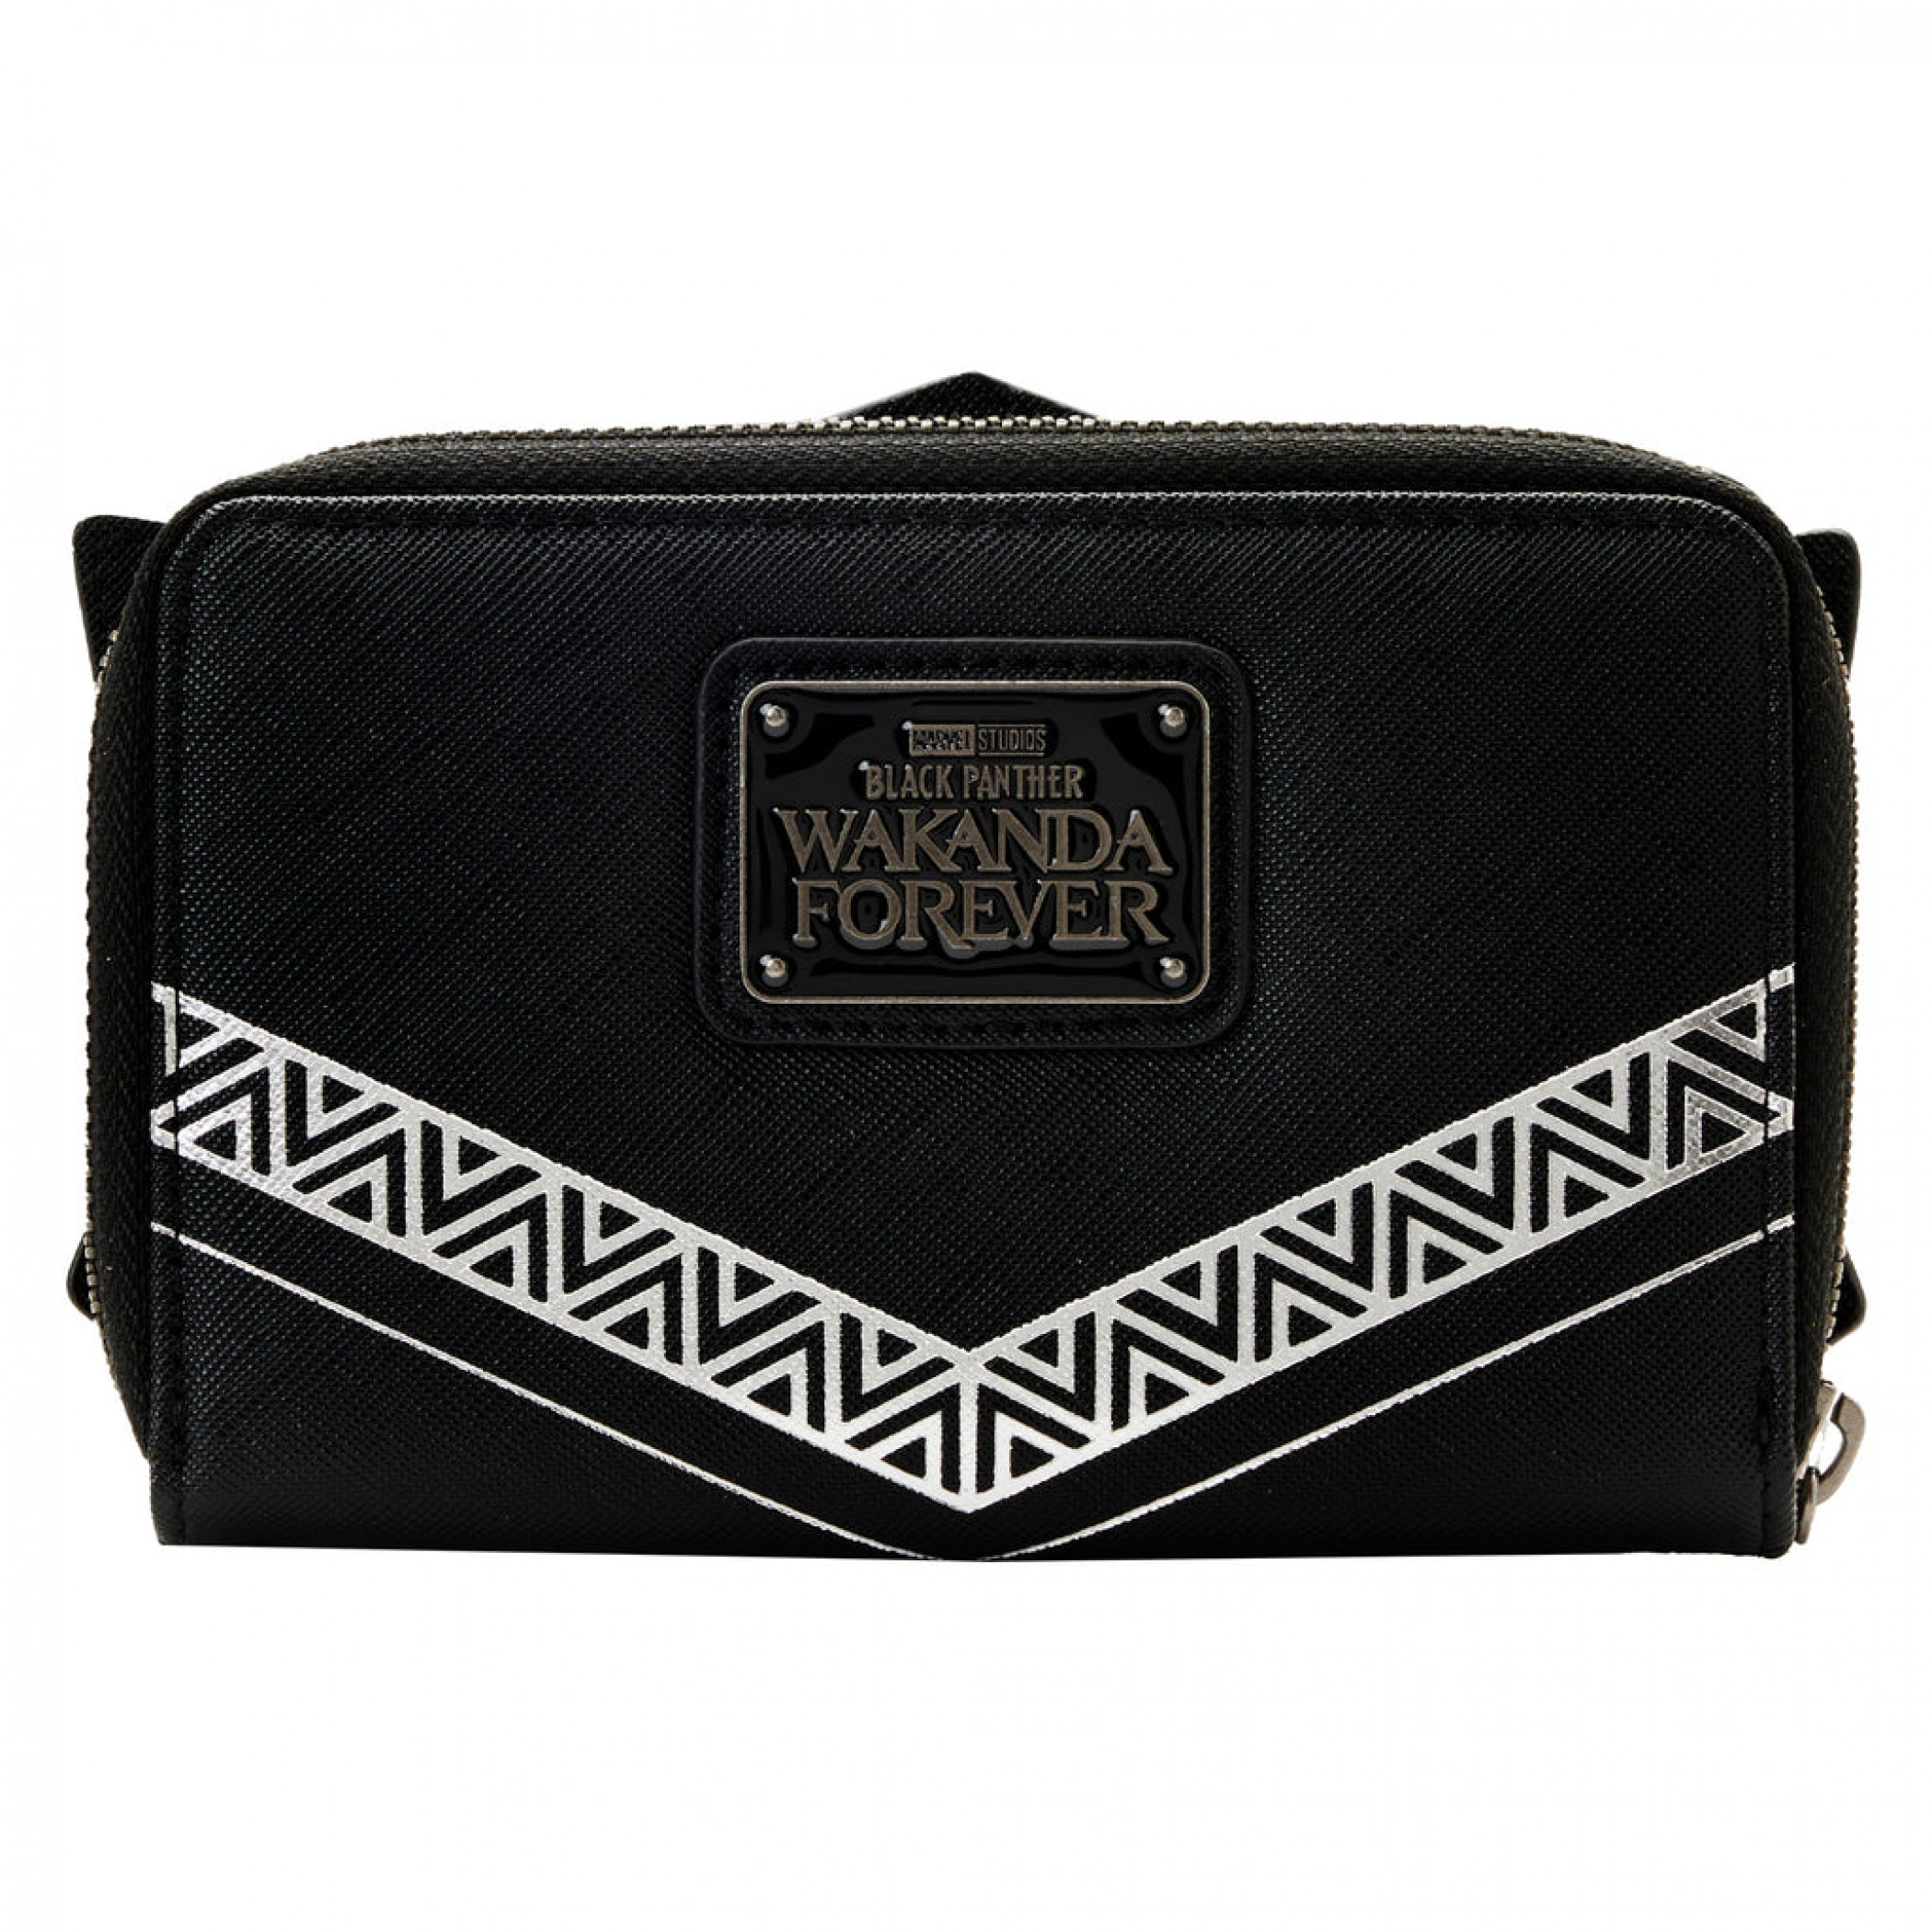 Black Panther Wakanda Forever Geometric Zip Around Wallet By Loungefly